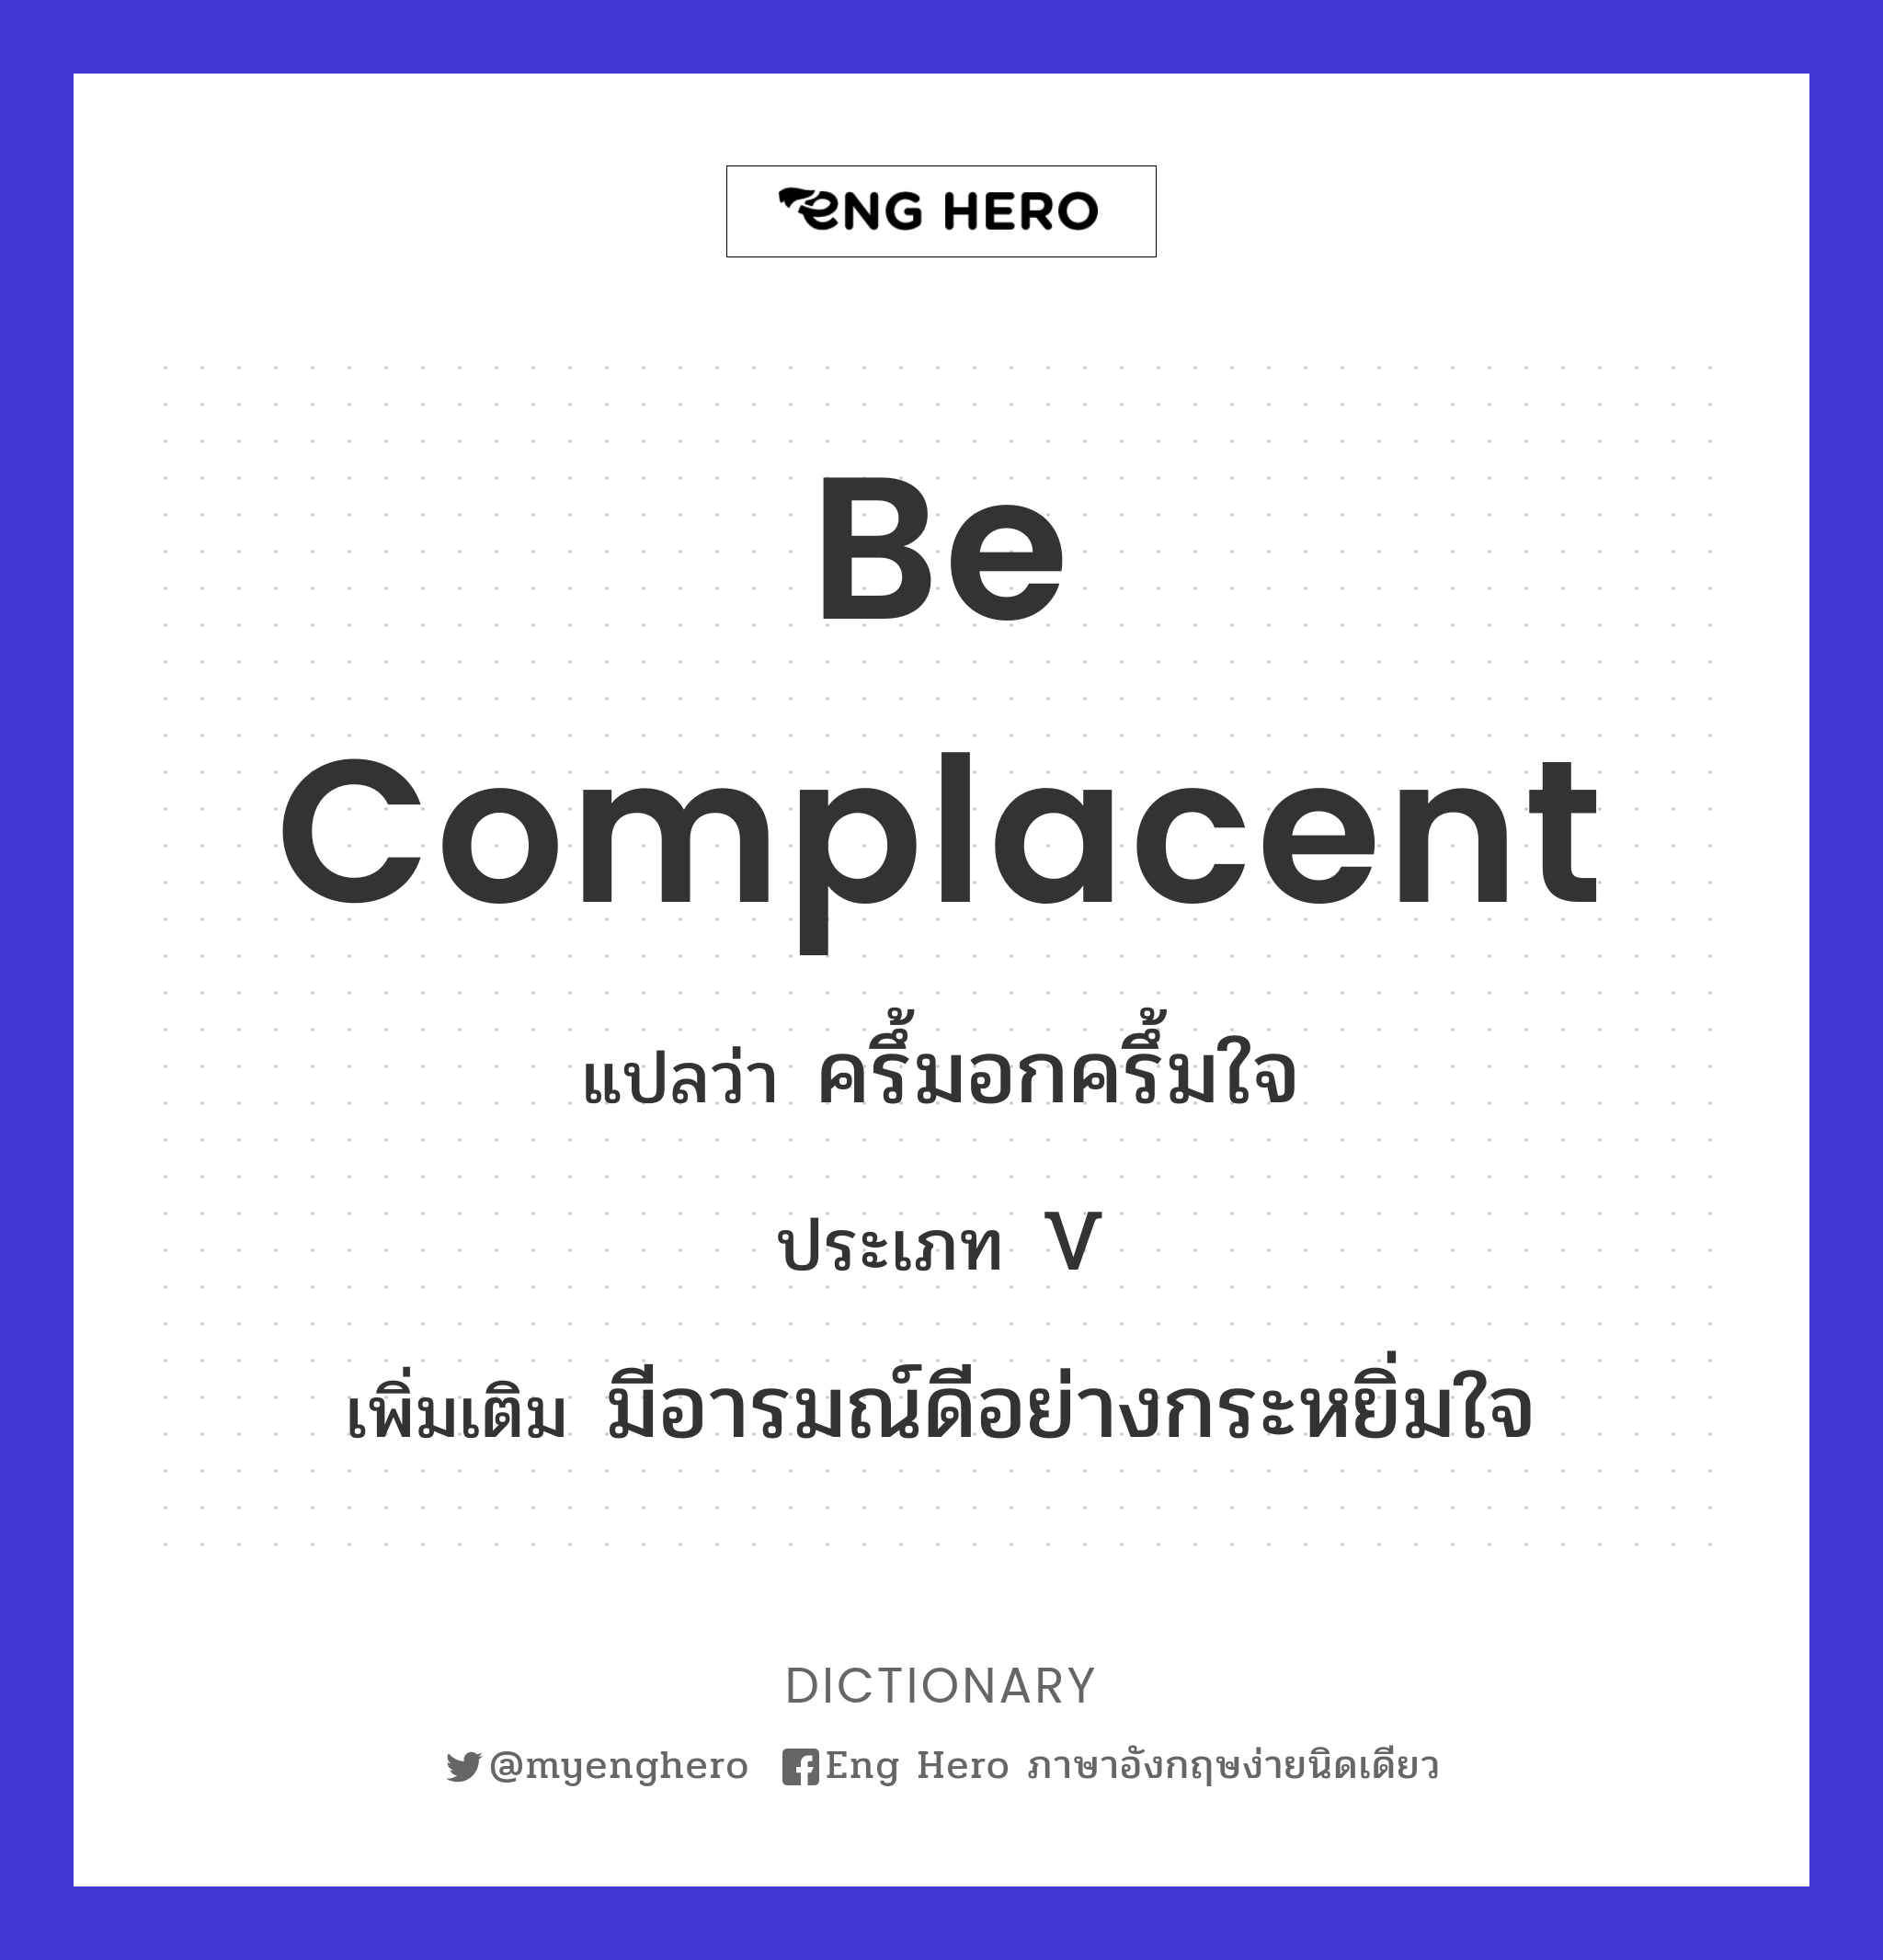 be complacent